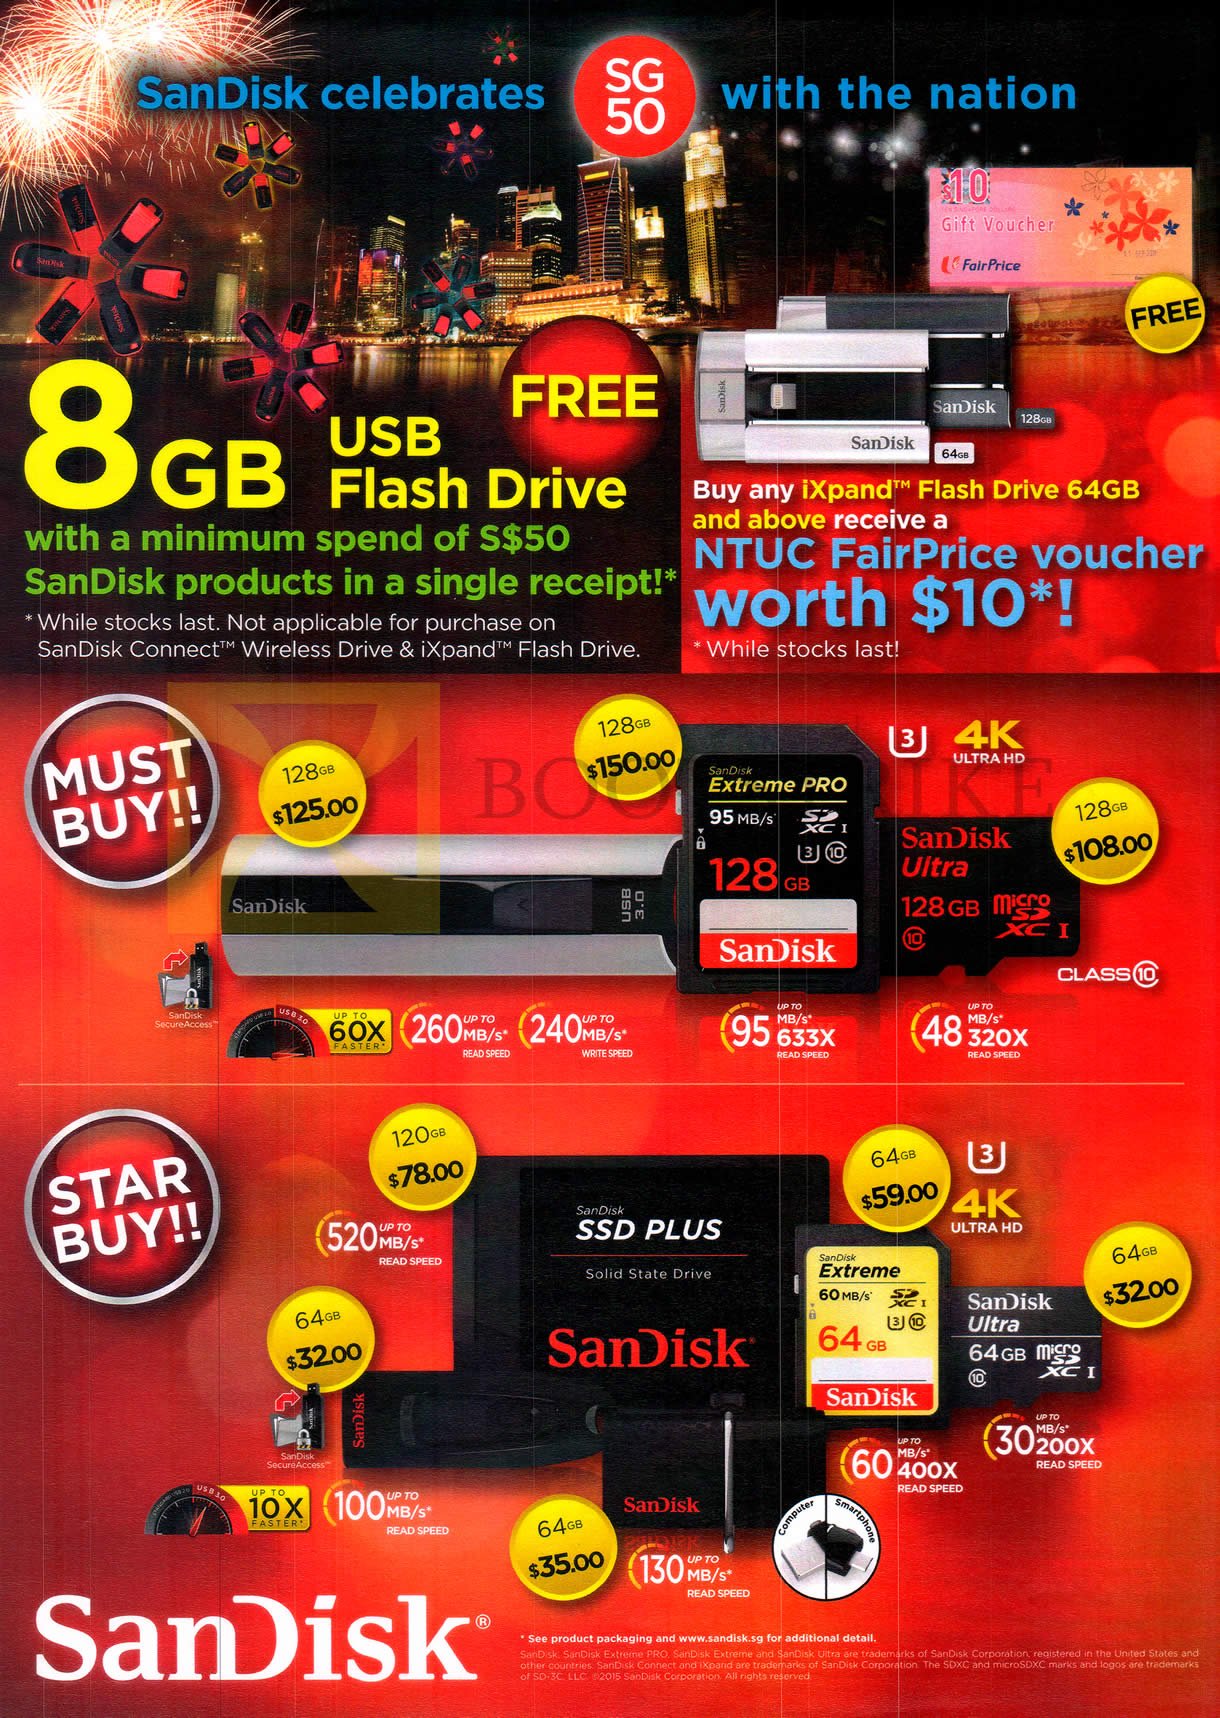 PC SHOW 2015 price list image brochure of Sandisk Memory Cards 128GB 64GB, SSD Plus, Extreme Pro